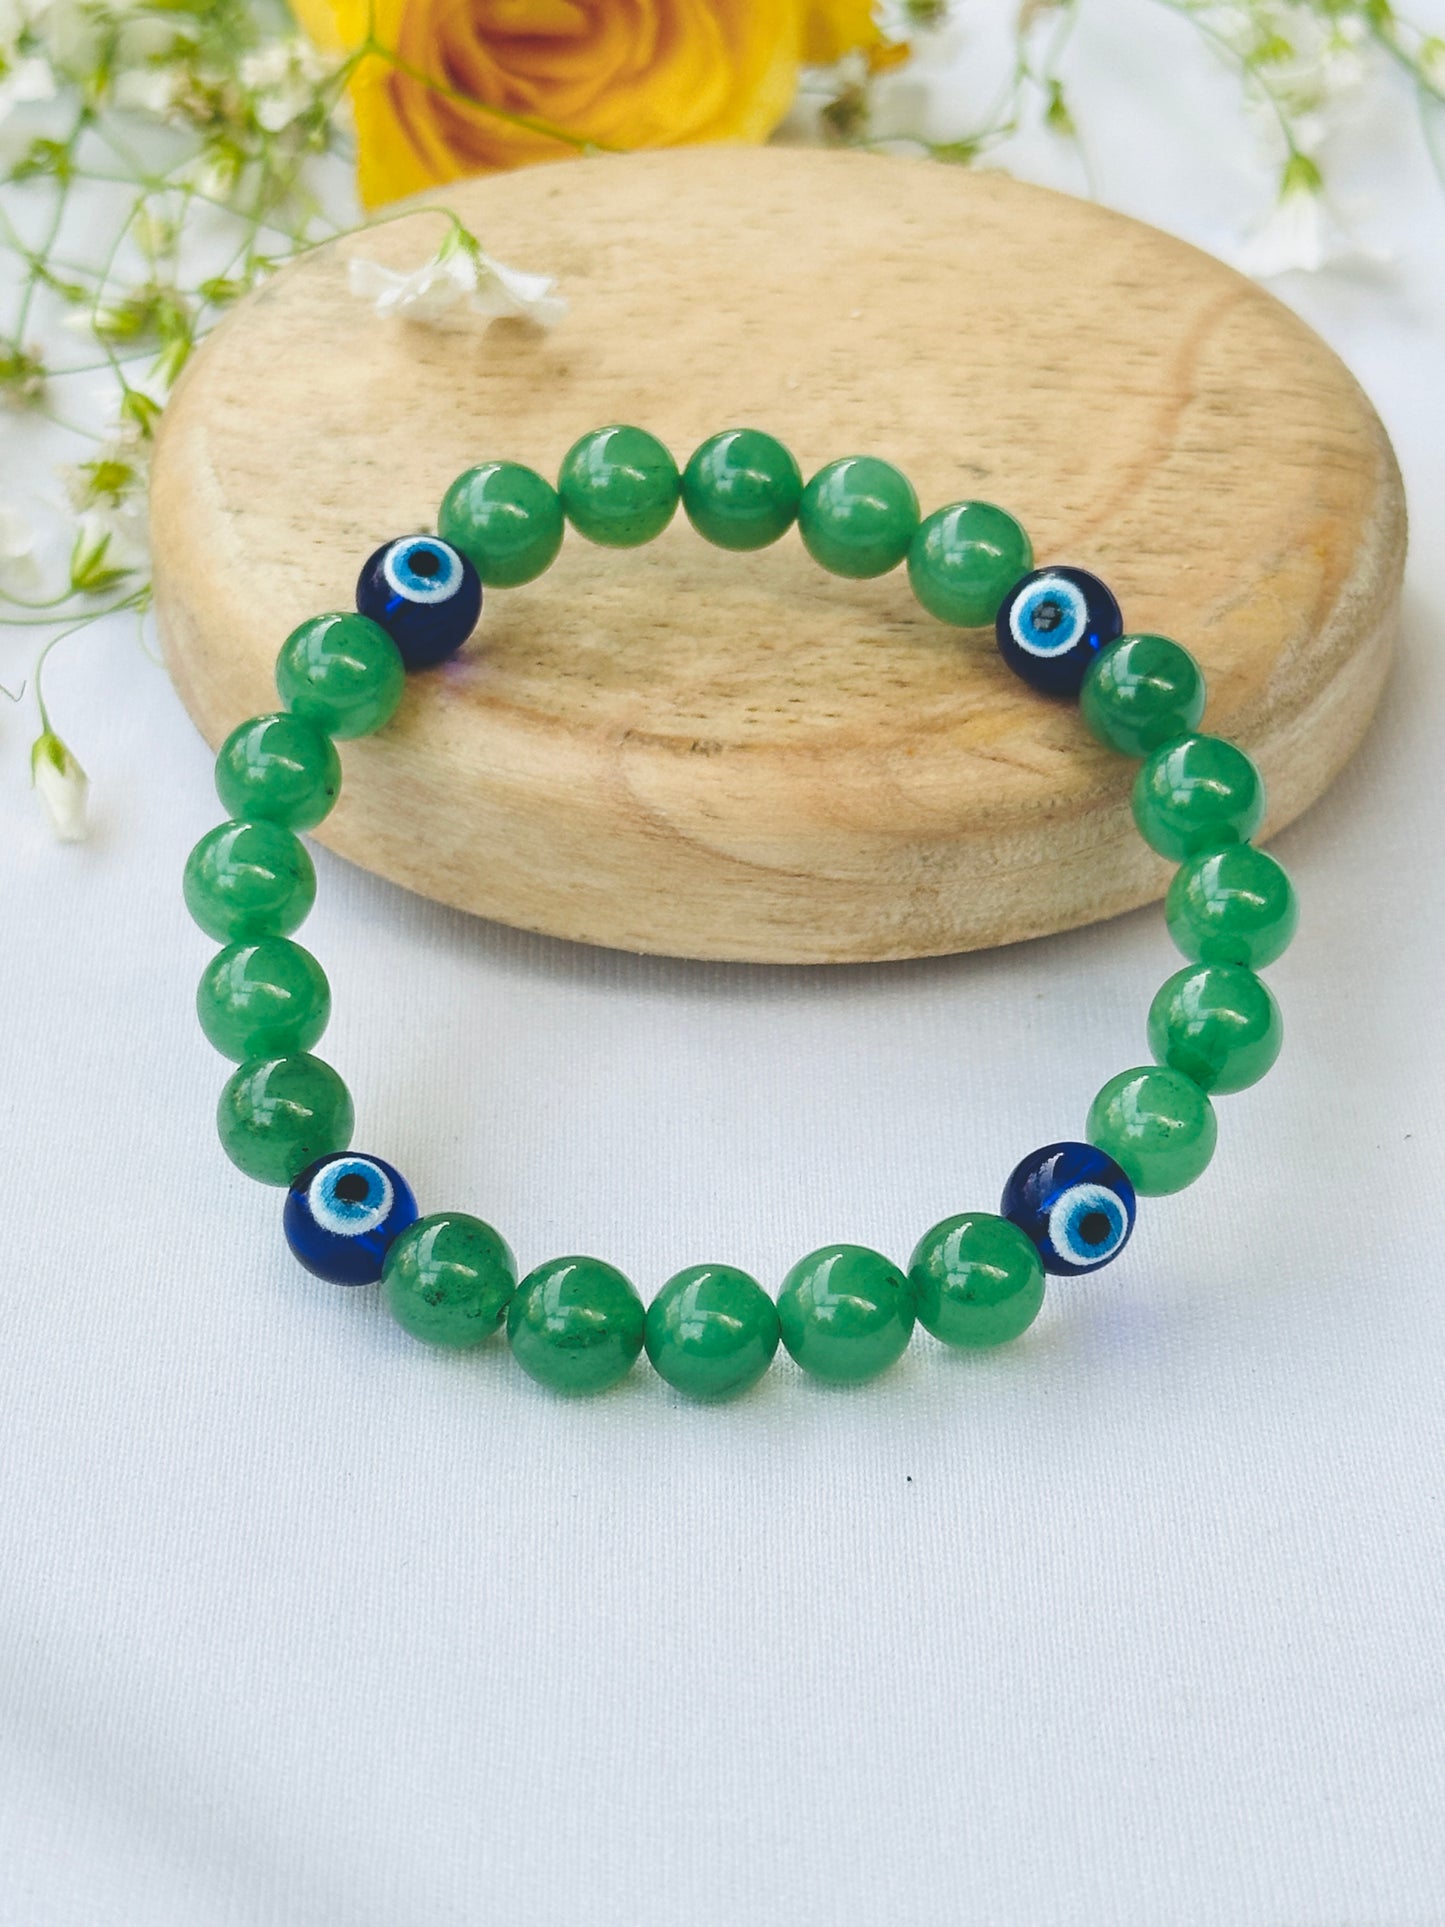 Wealth Attract and Evil Eye Protect Bracelet (Green Aventurine with Evil Eye) - Abhimantrit & Certified